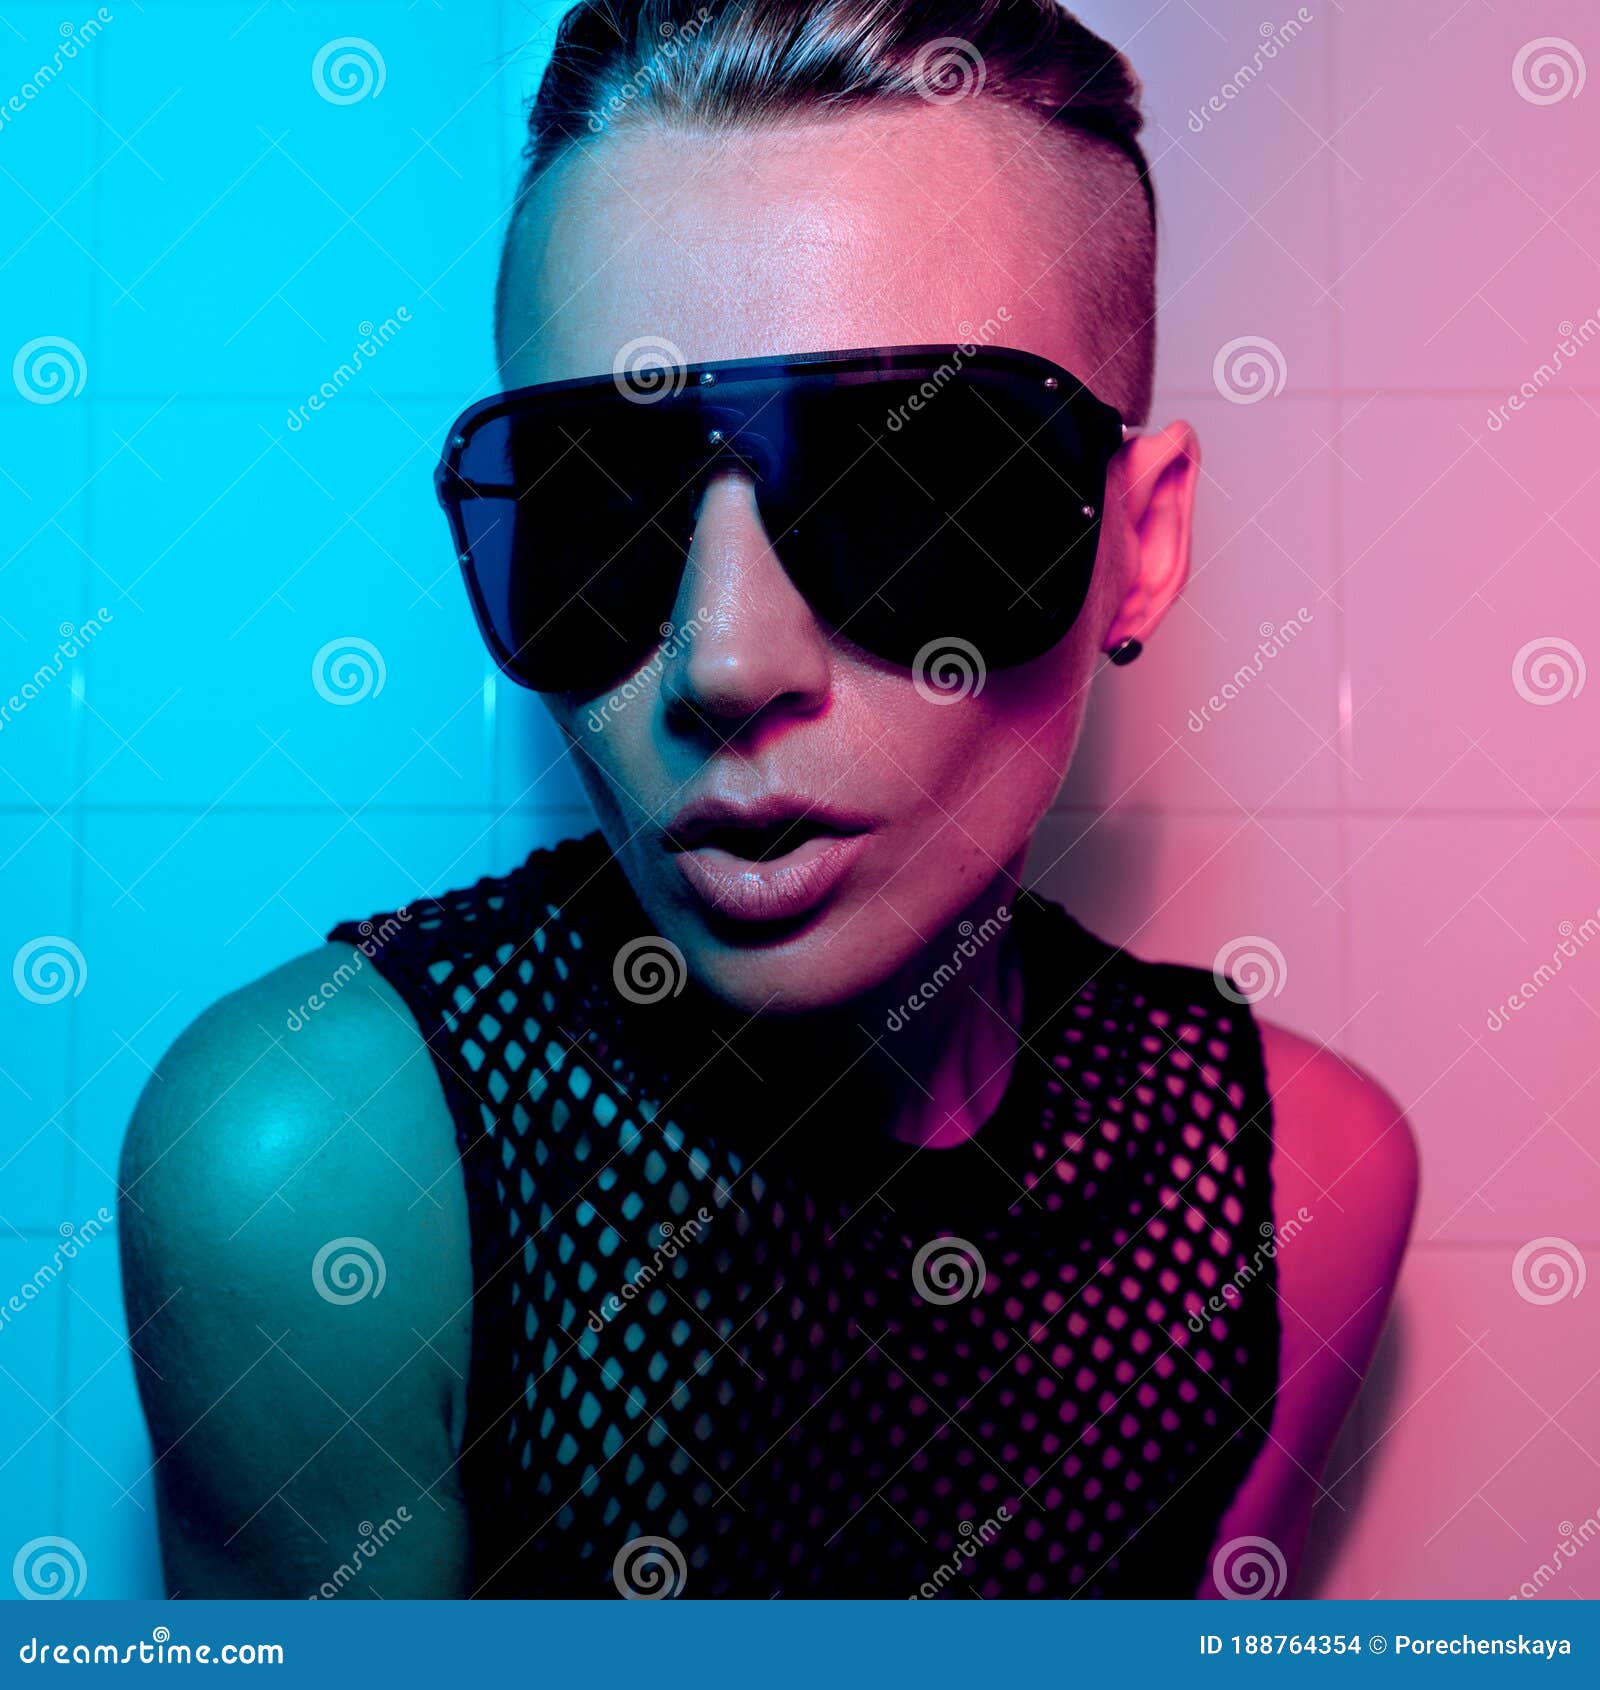 Tomboy Girl with Short Hair and Luxury Sunglasses. Fashion Party Style Club  Neon Light Stock Photo - Image of clothing, swag: 188764354